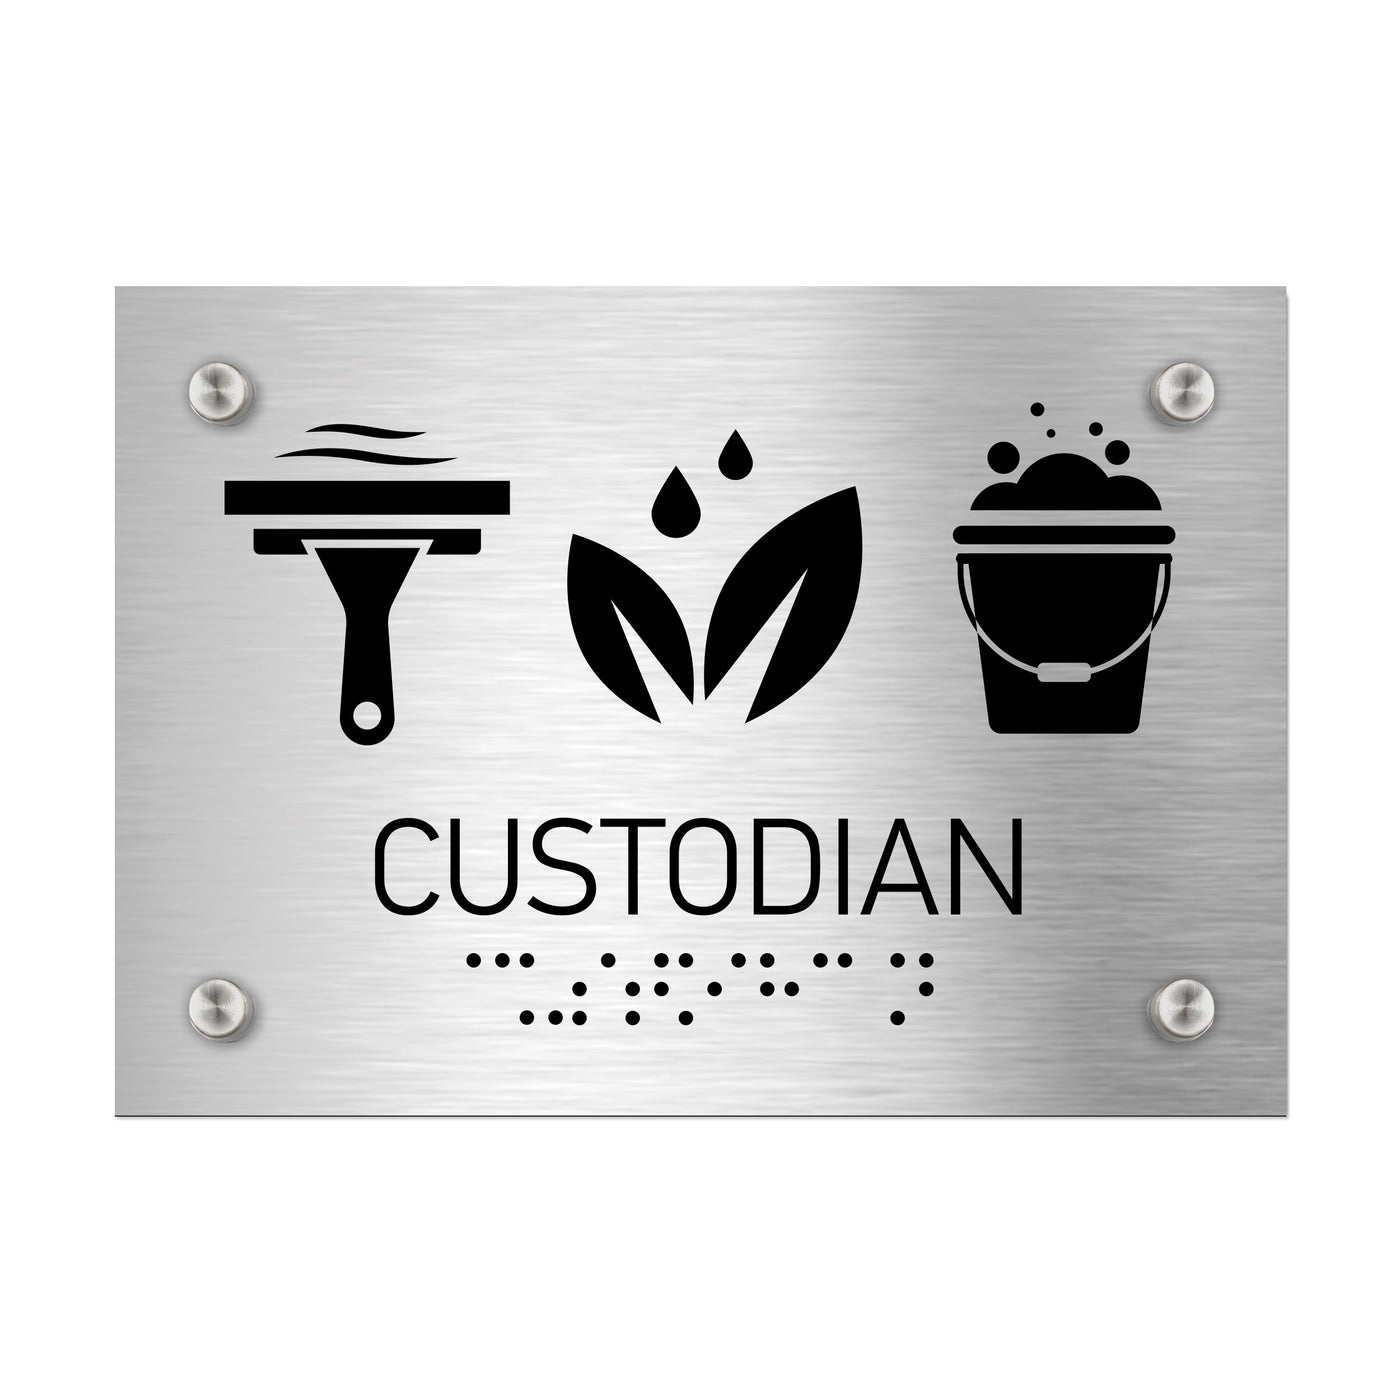 Information Signs - Custodian Sign - Stainless Steel